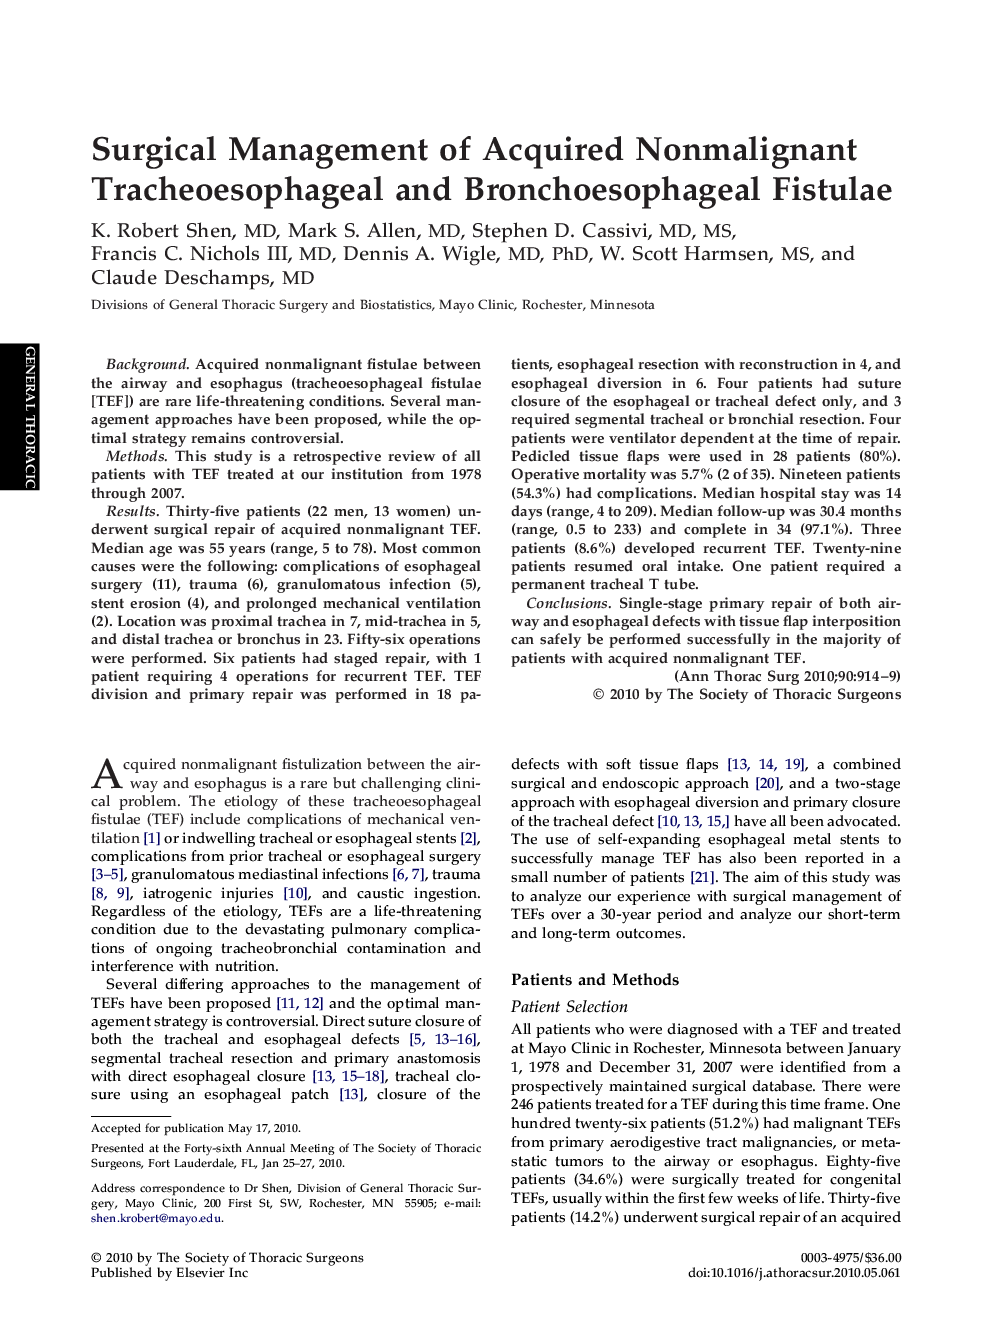 Surgical Management of Acquired Nonmalignant Tracheoesophageal and Bronchoesophageal Fistulae